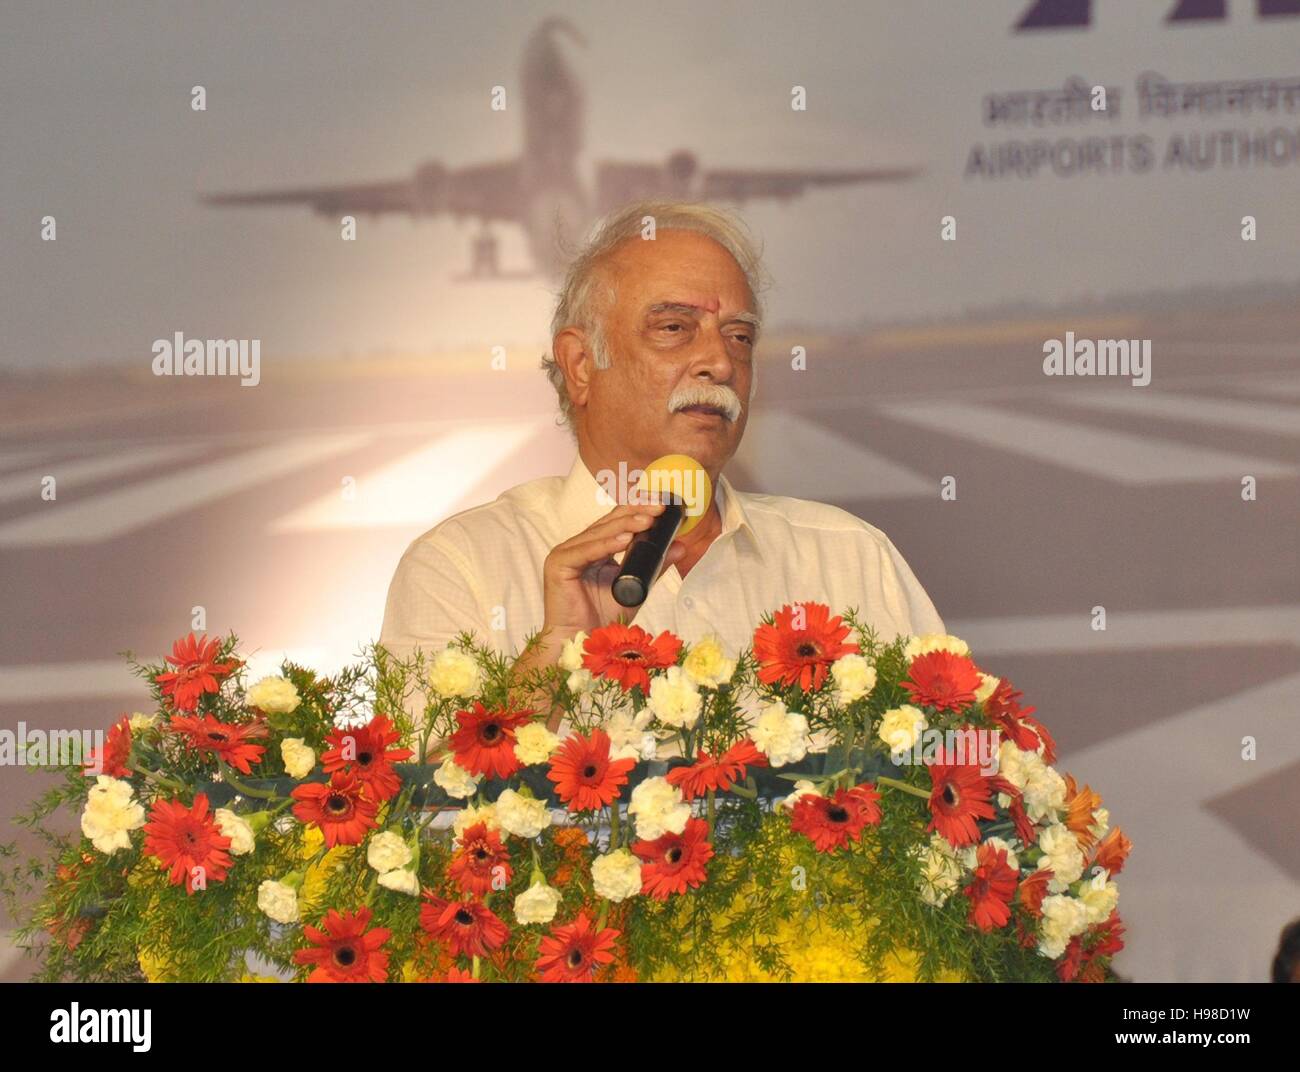 Indian Union Minister for Civil Aviation, Ashok Gajapathi Raju Pusapati addresses a gathering at the foundation stone laying ceremony for the Extension of the Runway at Rajahmundry Airport September 19, 2016 in Rajahmundry, Andhra Pradesh, India. Stock Photo